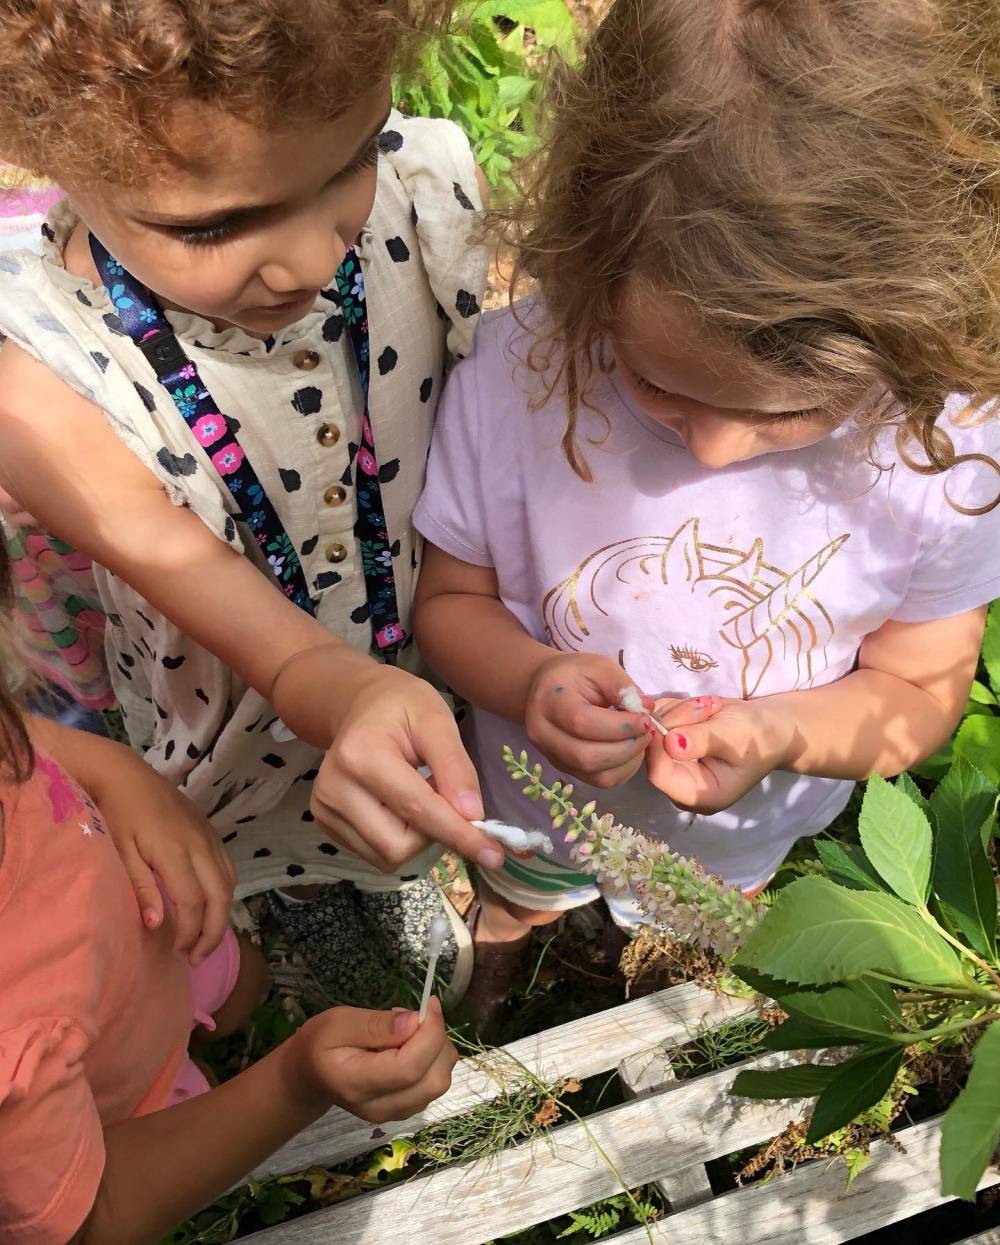 TOP NEW JERSEY COED CAMP: Cora Hartshorn Nature Discovery  is a Top Coed Summer Camp located in Short Hills New Jersey offering many fun and enriching Coed and other camp programs. 